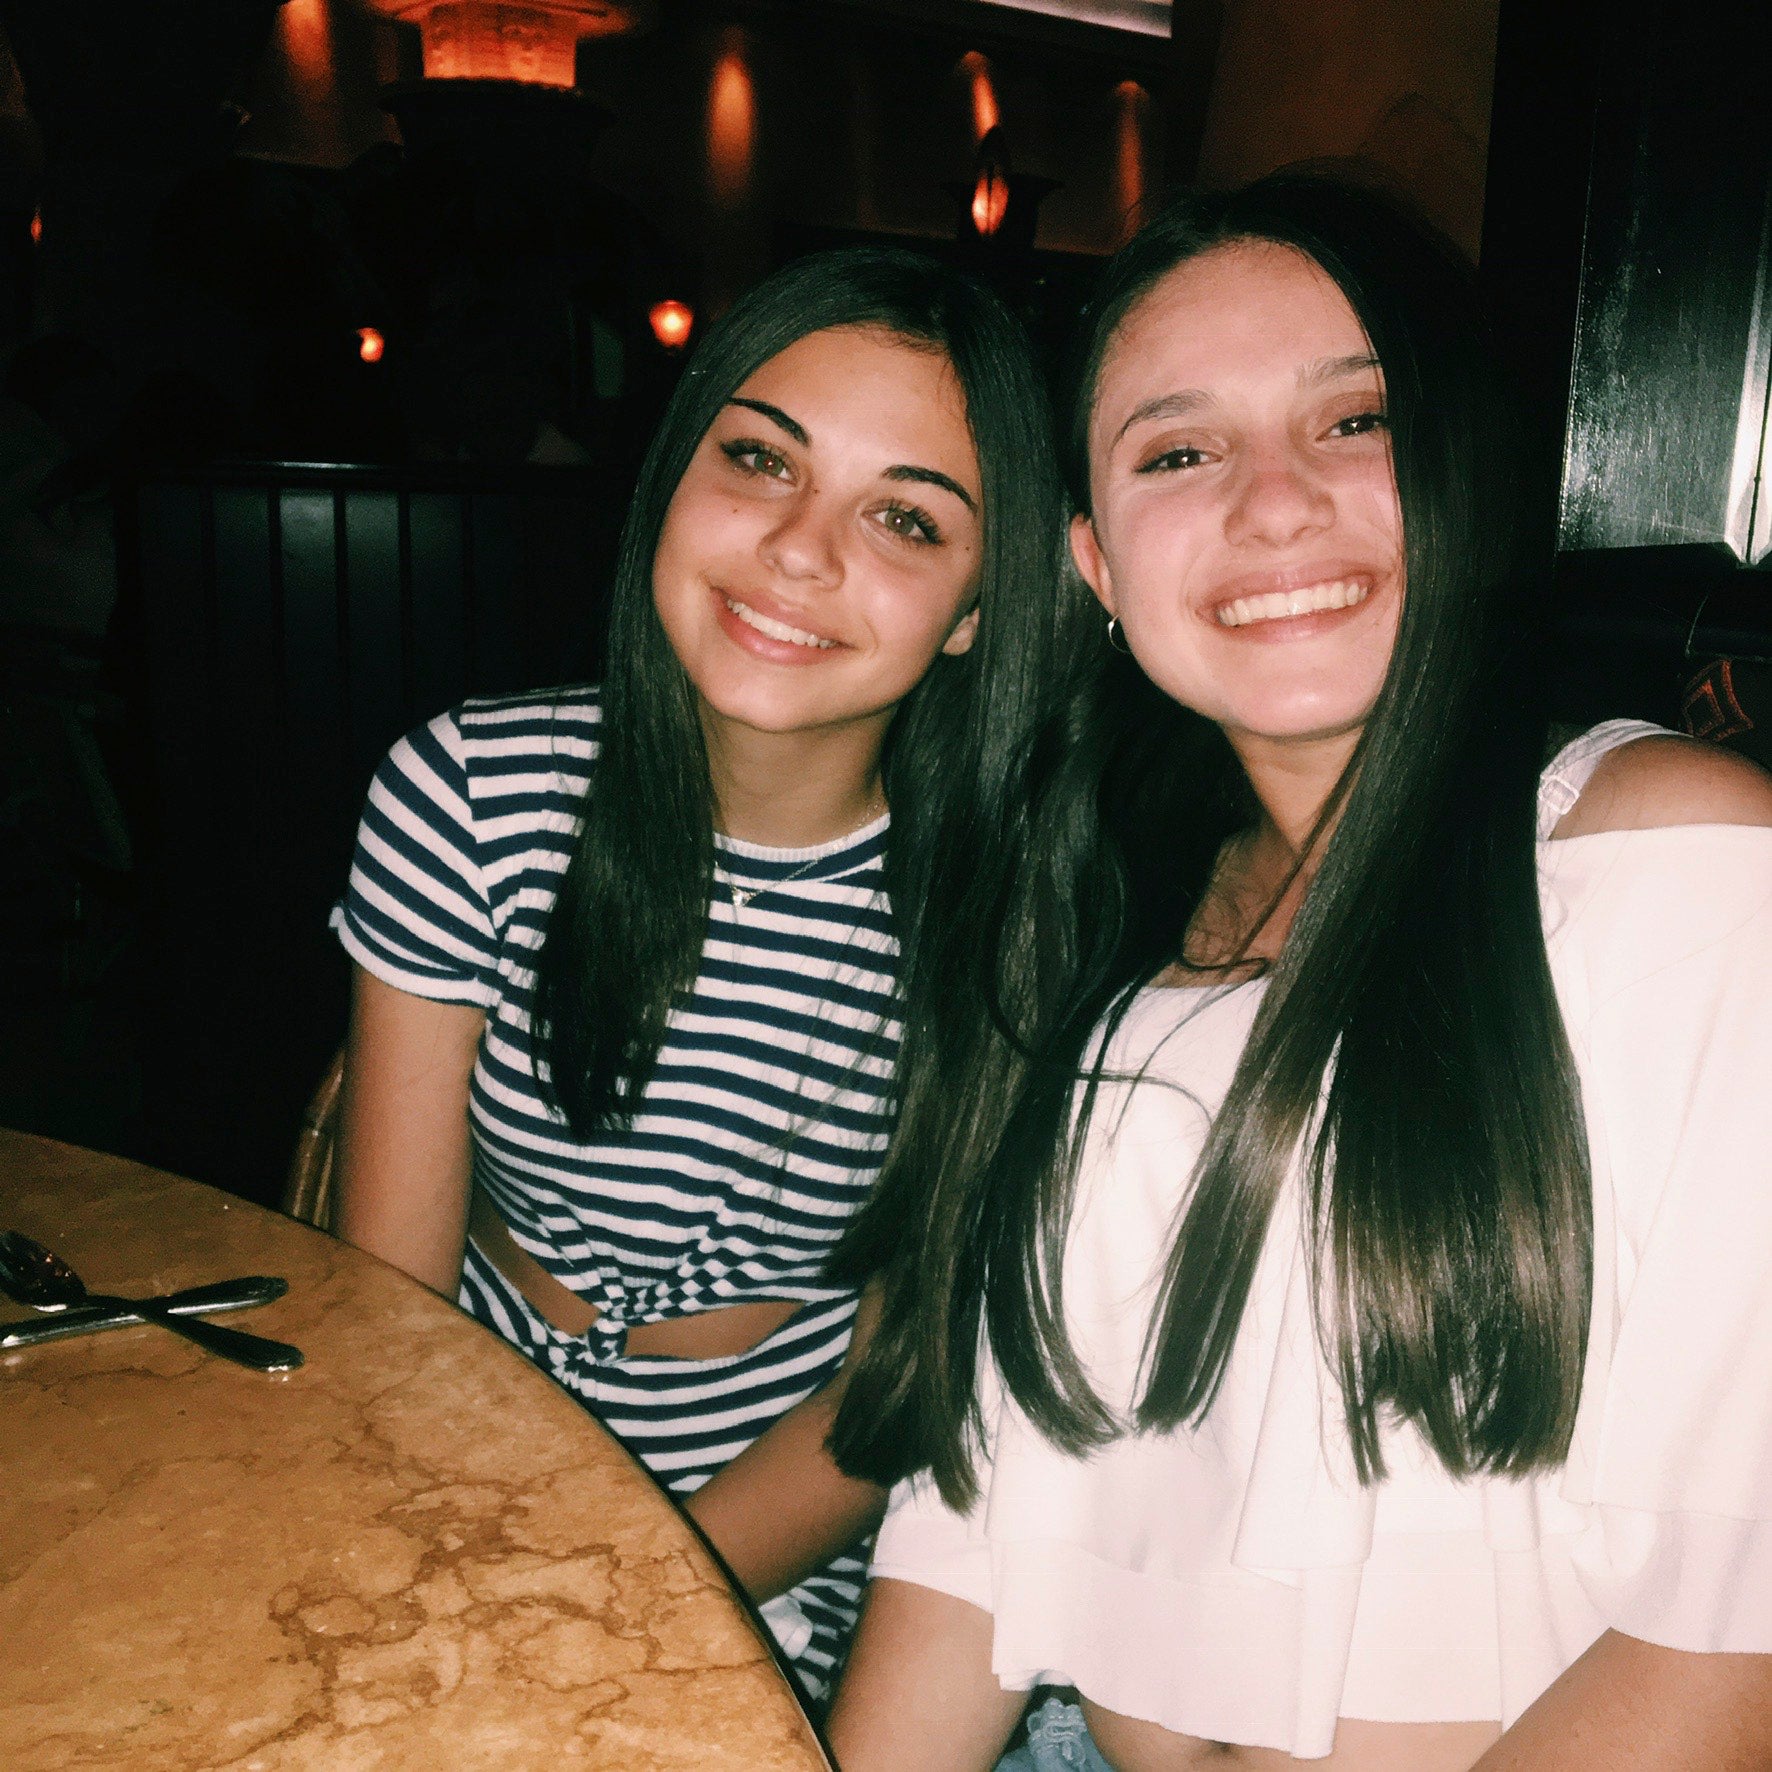 Alyssa Alhadeff is pictured on the right with her best friend